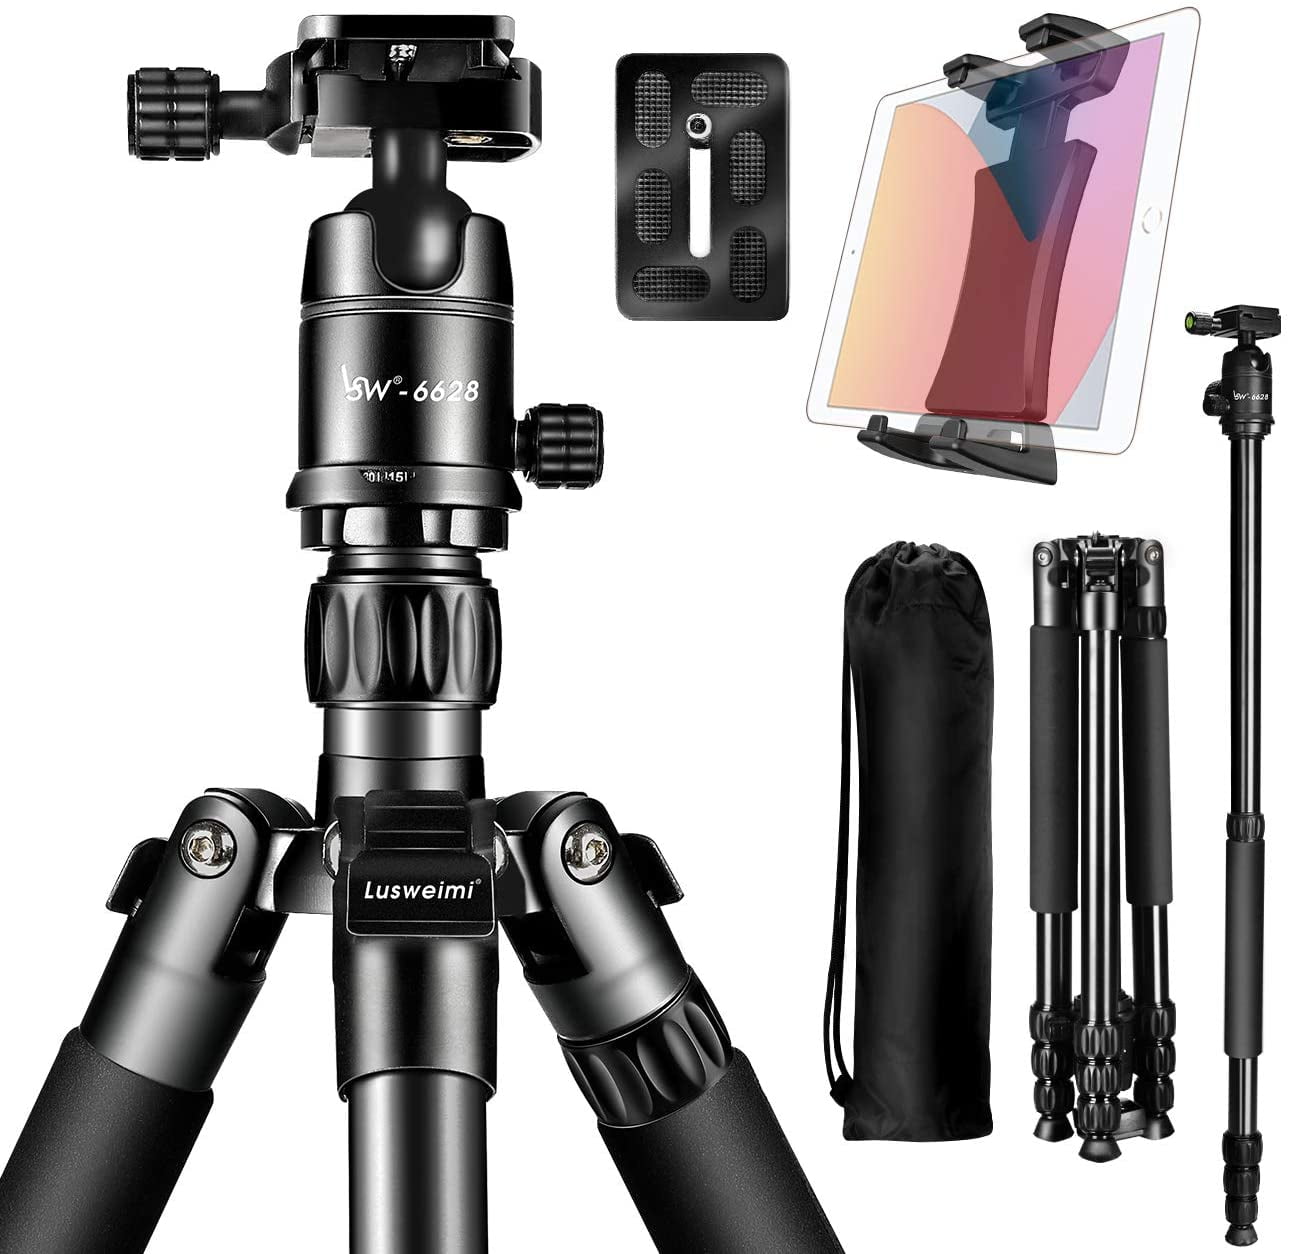 SLR Camera Monopod Telescoping DSLR Monopods with Removable Ultra Compact and Lightweight Aluminum Tripod